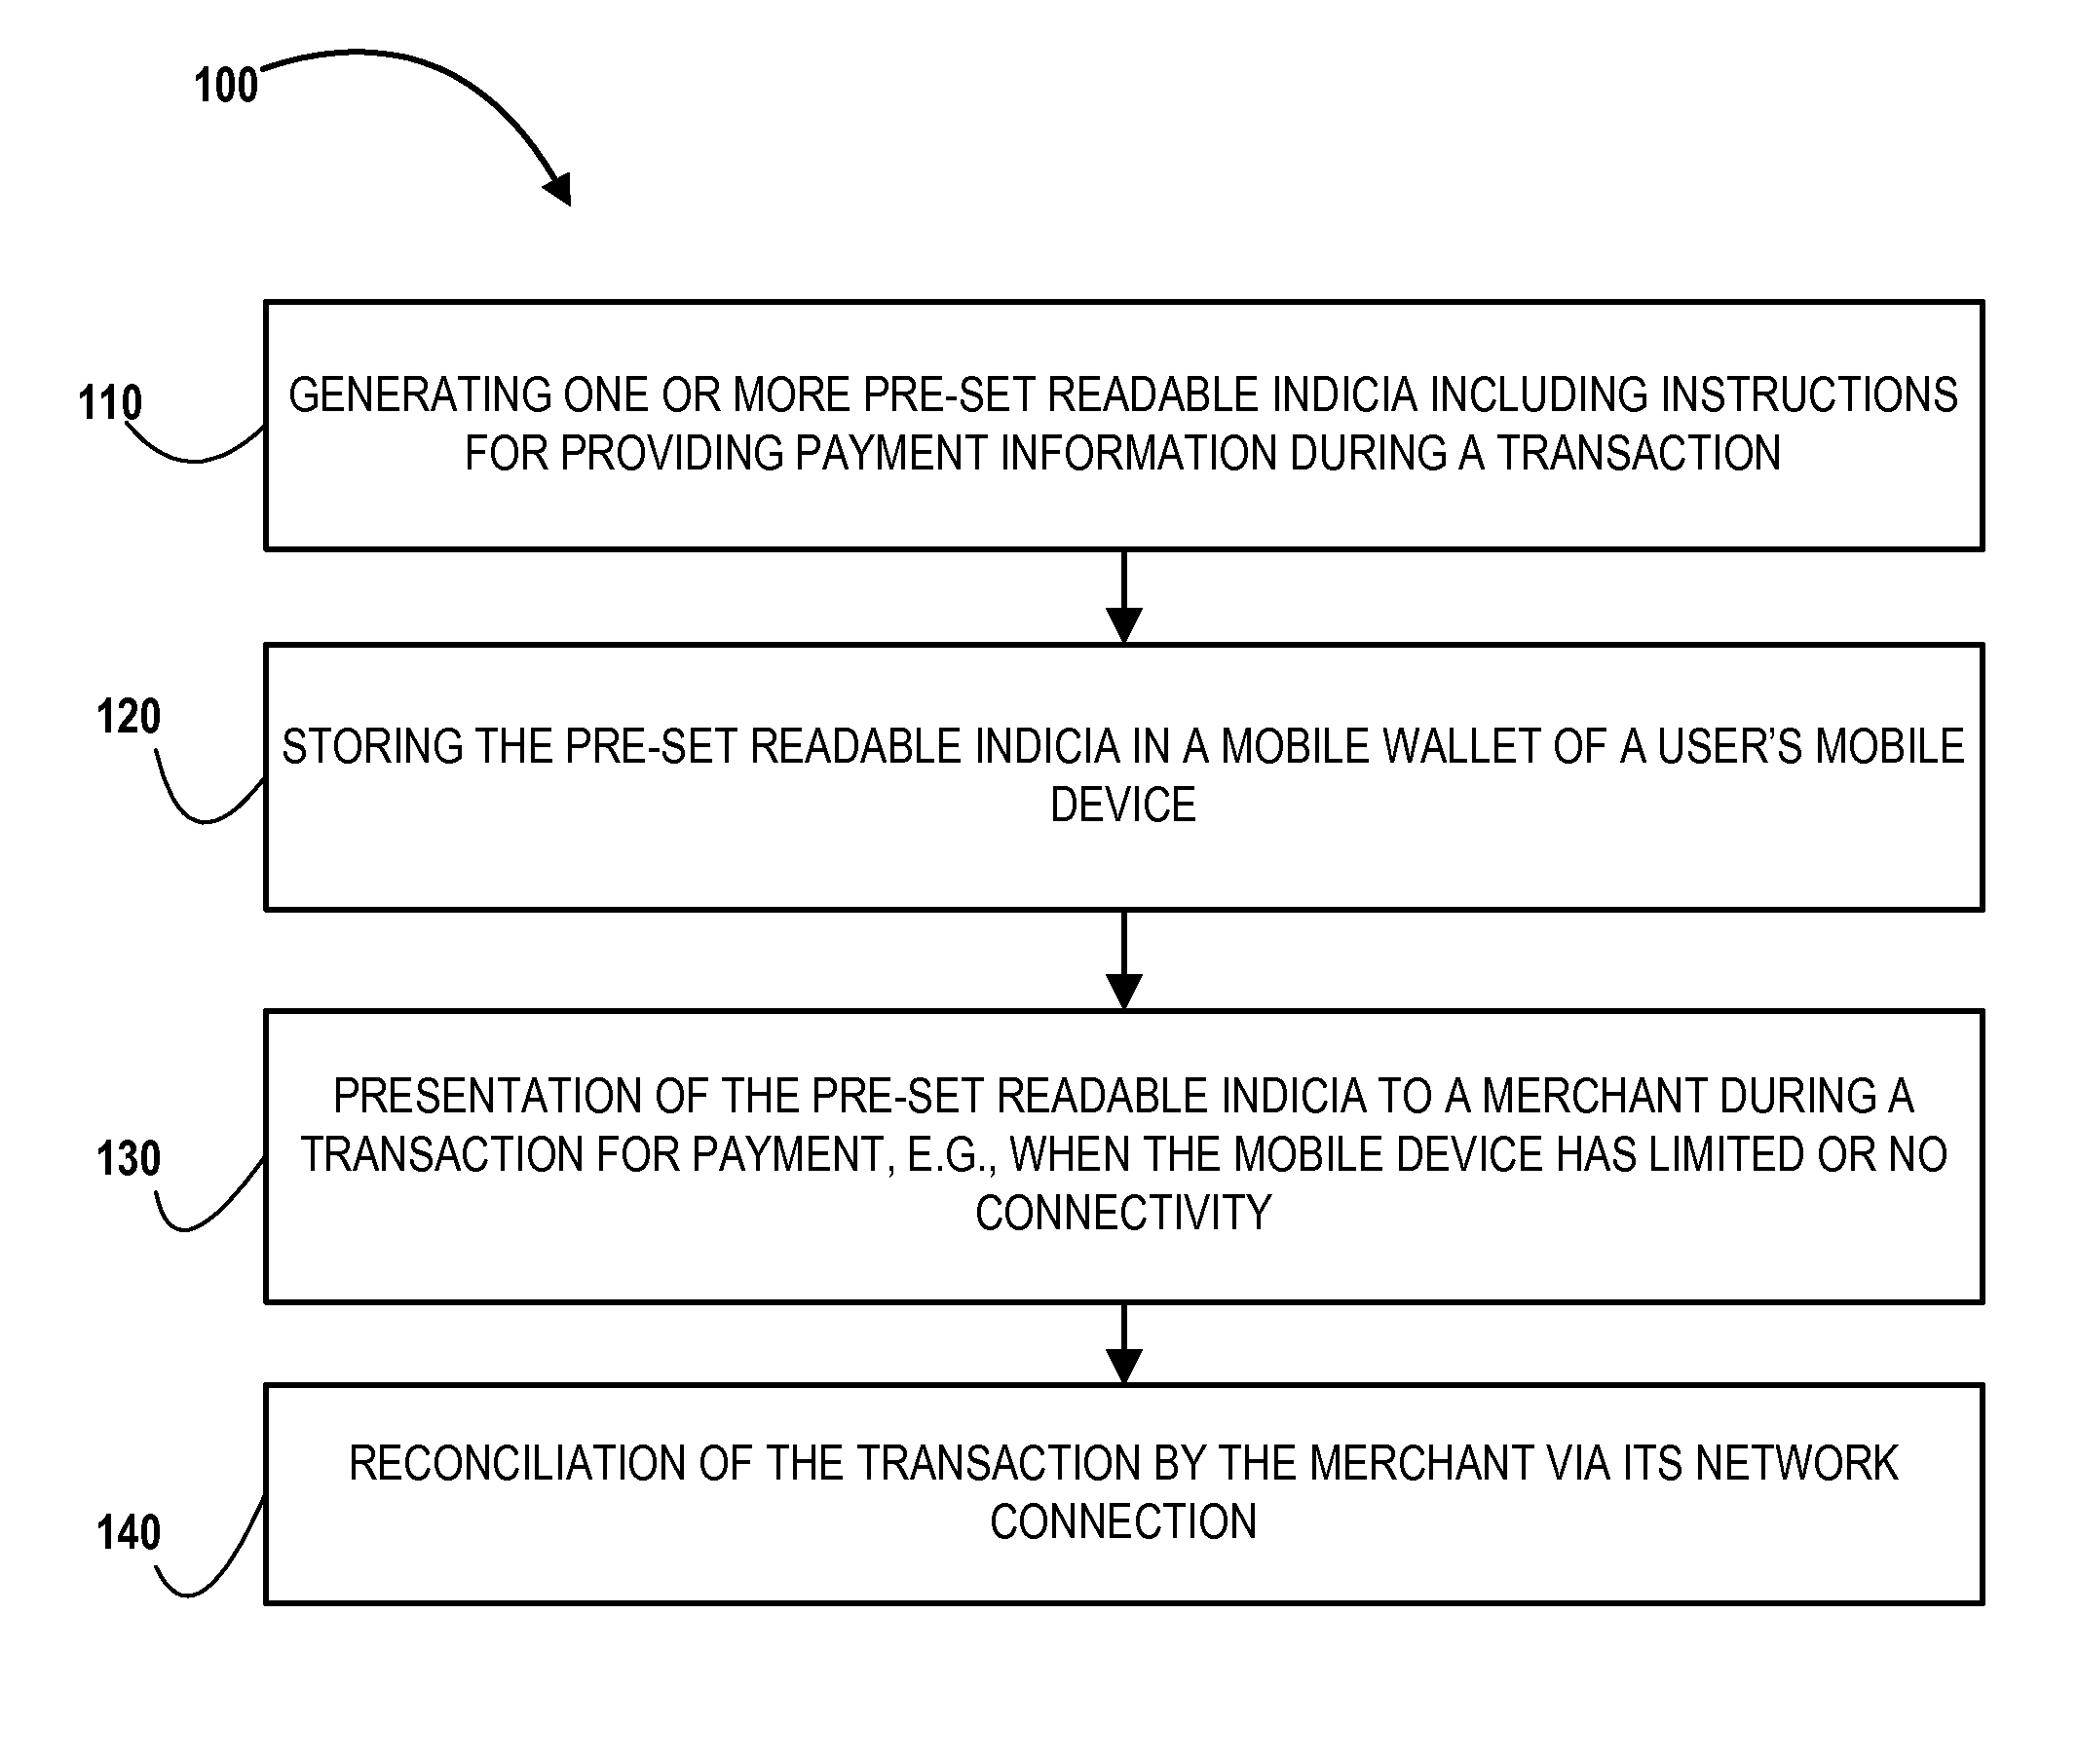 Pre-set readable indicia to facilitate payment during a transaction with a merchant when there is limited network connectivity